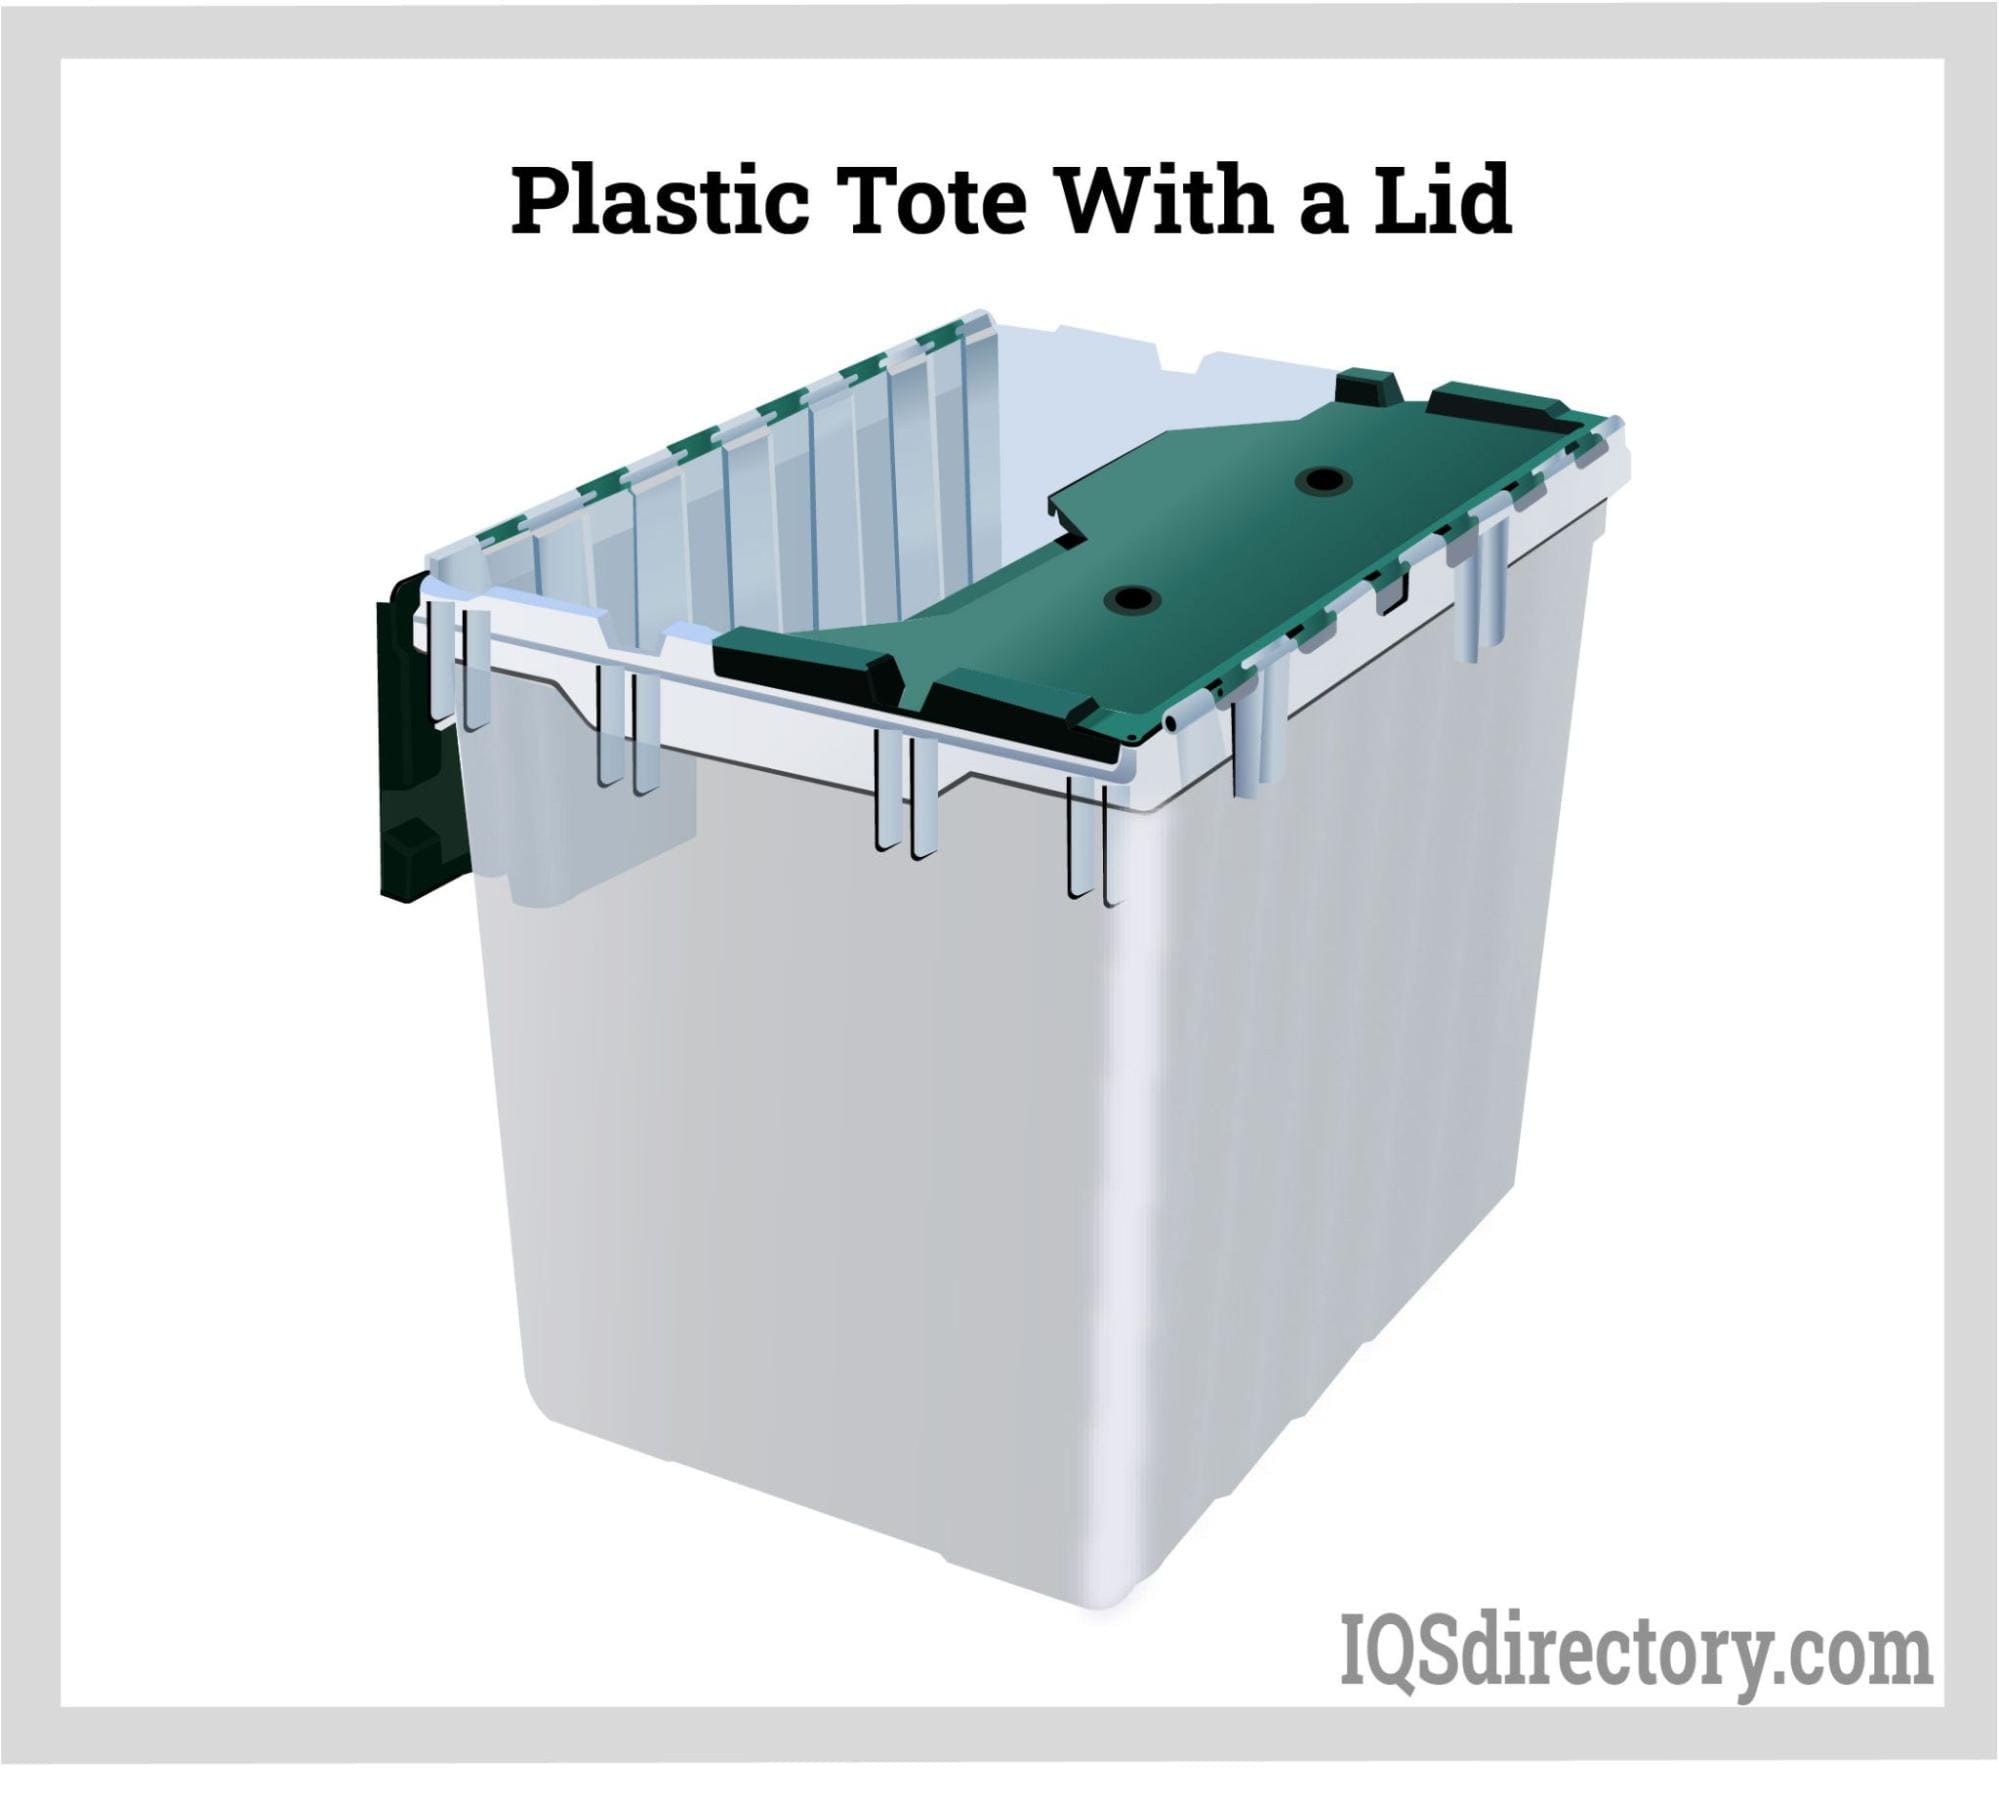 Plastic Tote with a Lid